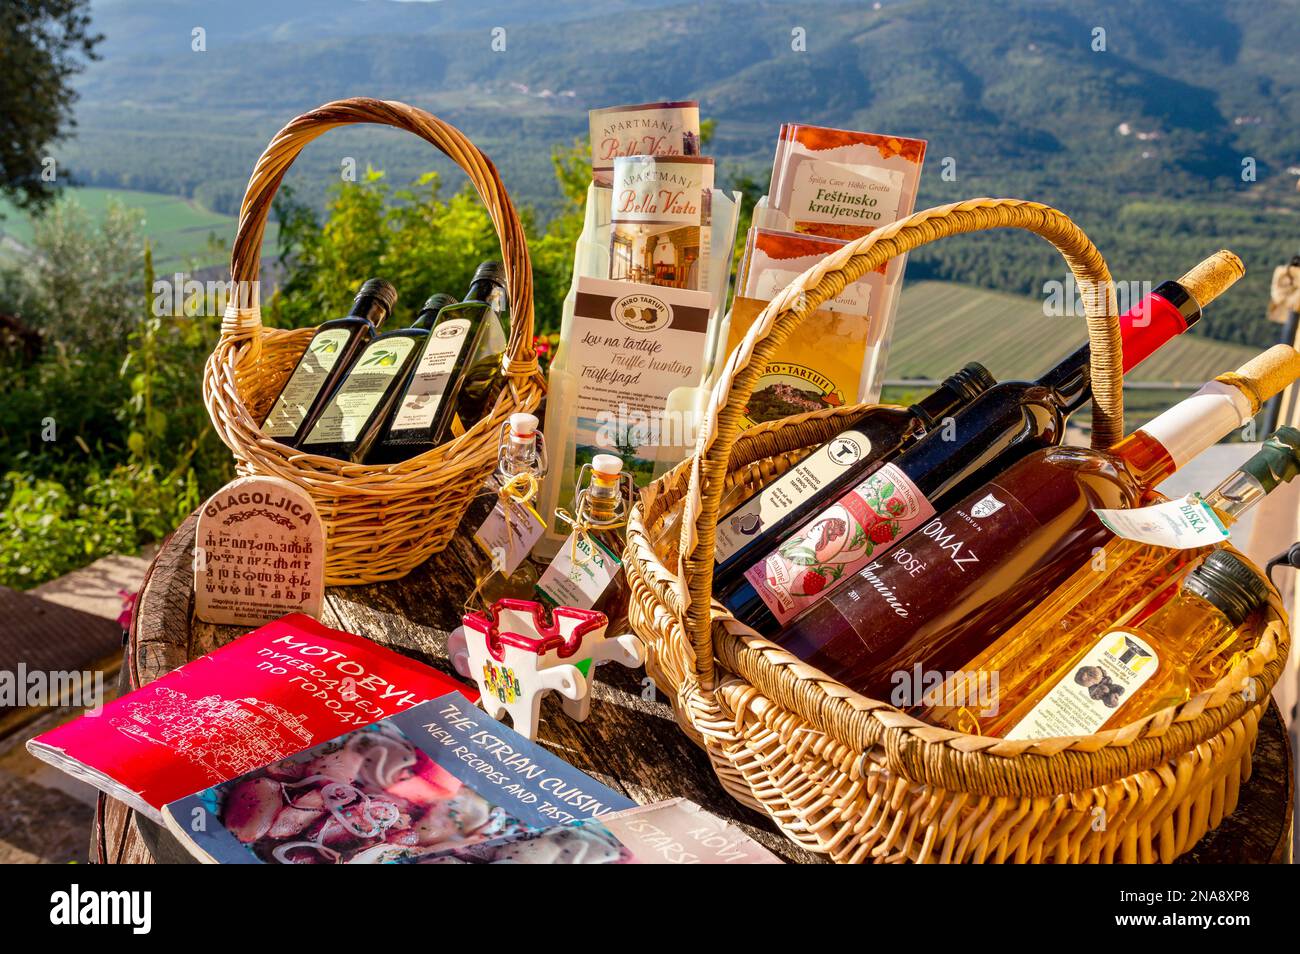 Baskets of olive oil and wine bottles and brochures advertising the traditional food industries; Motovun, Croatia Stock Photo